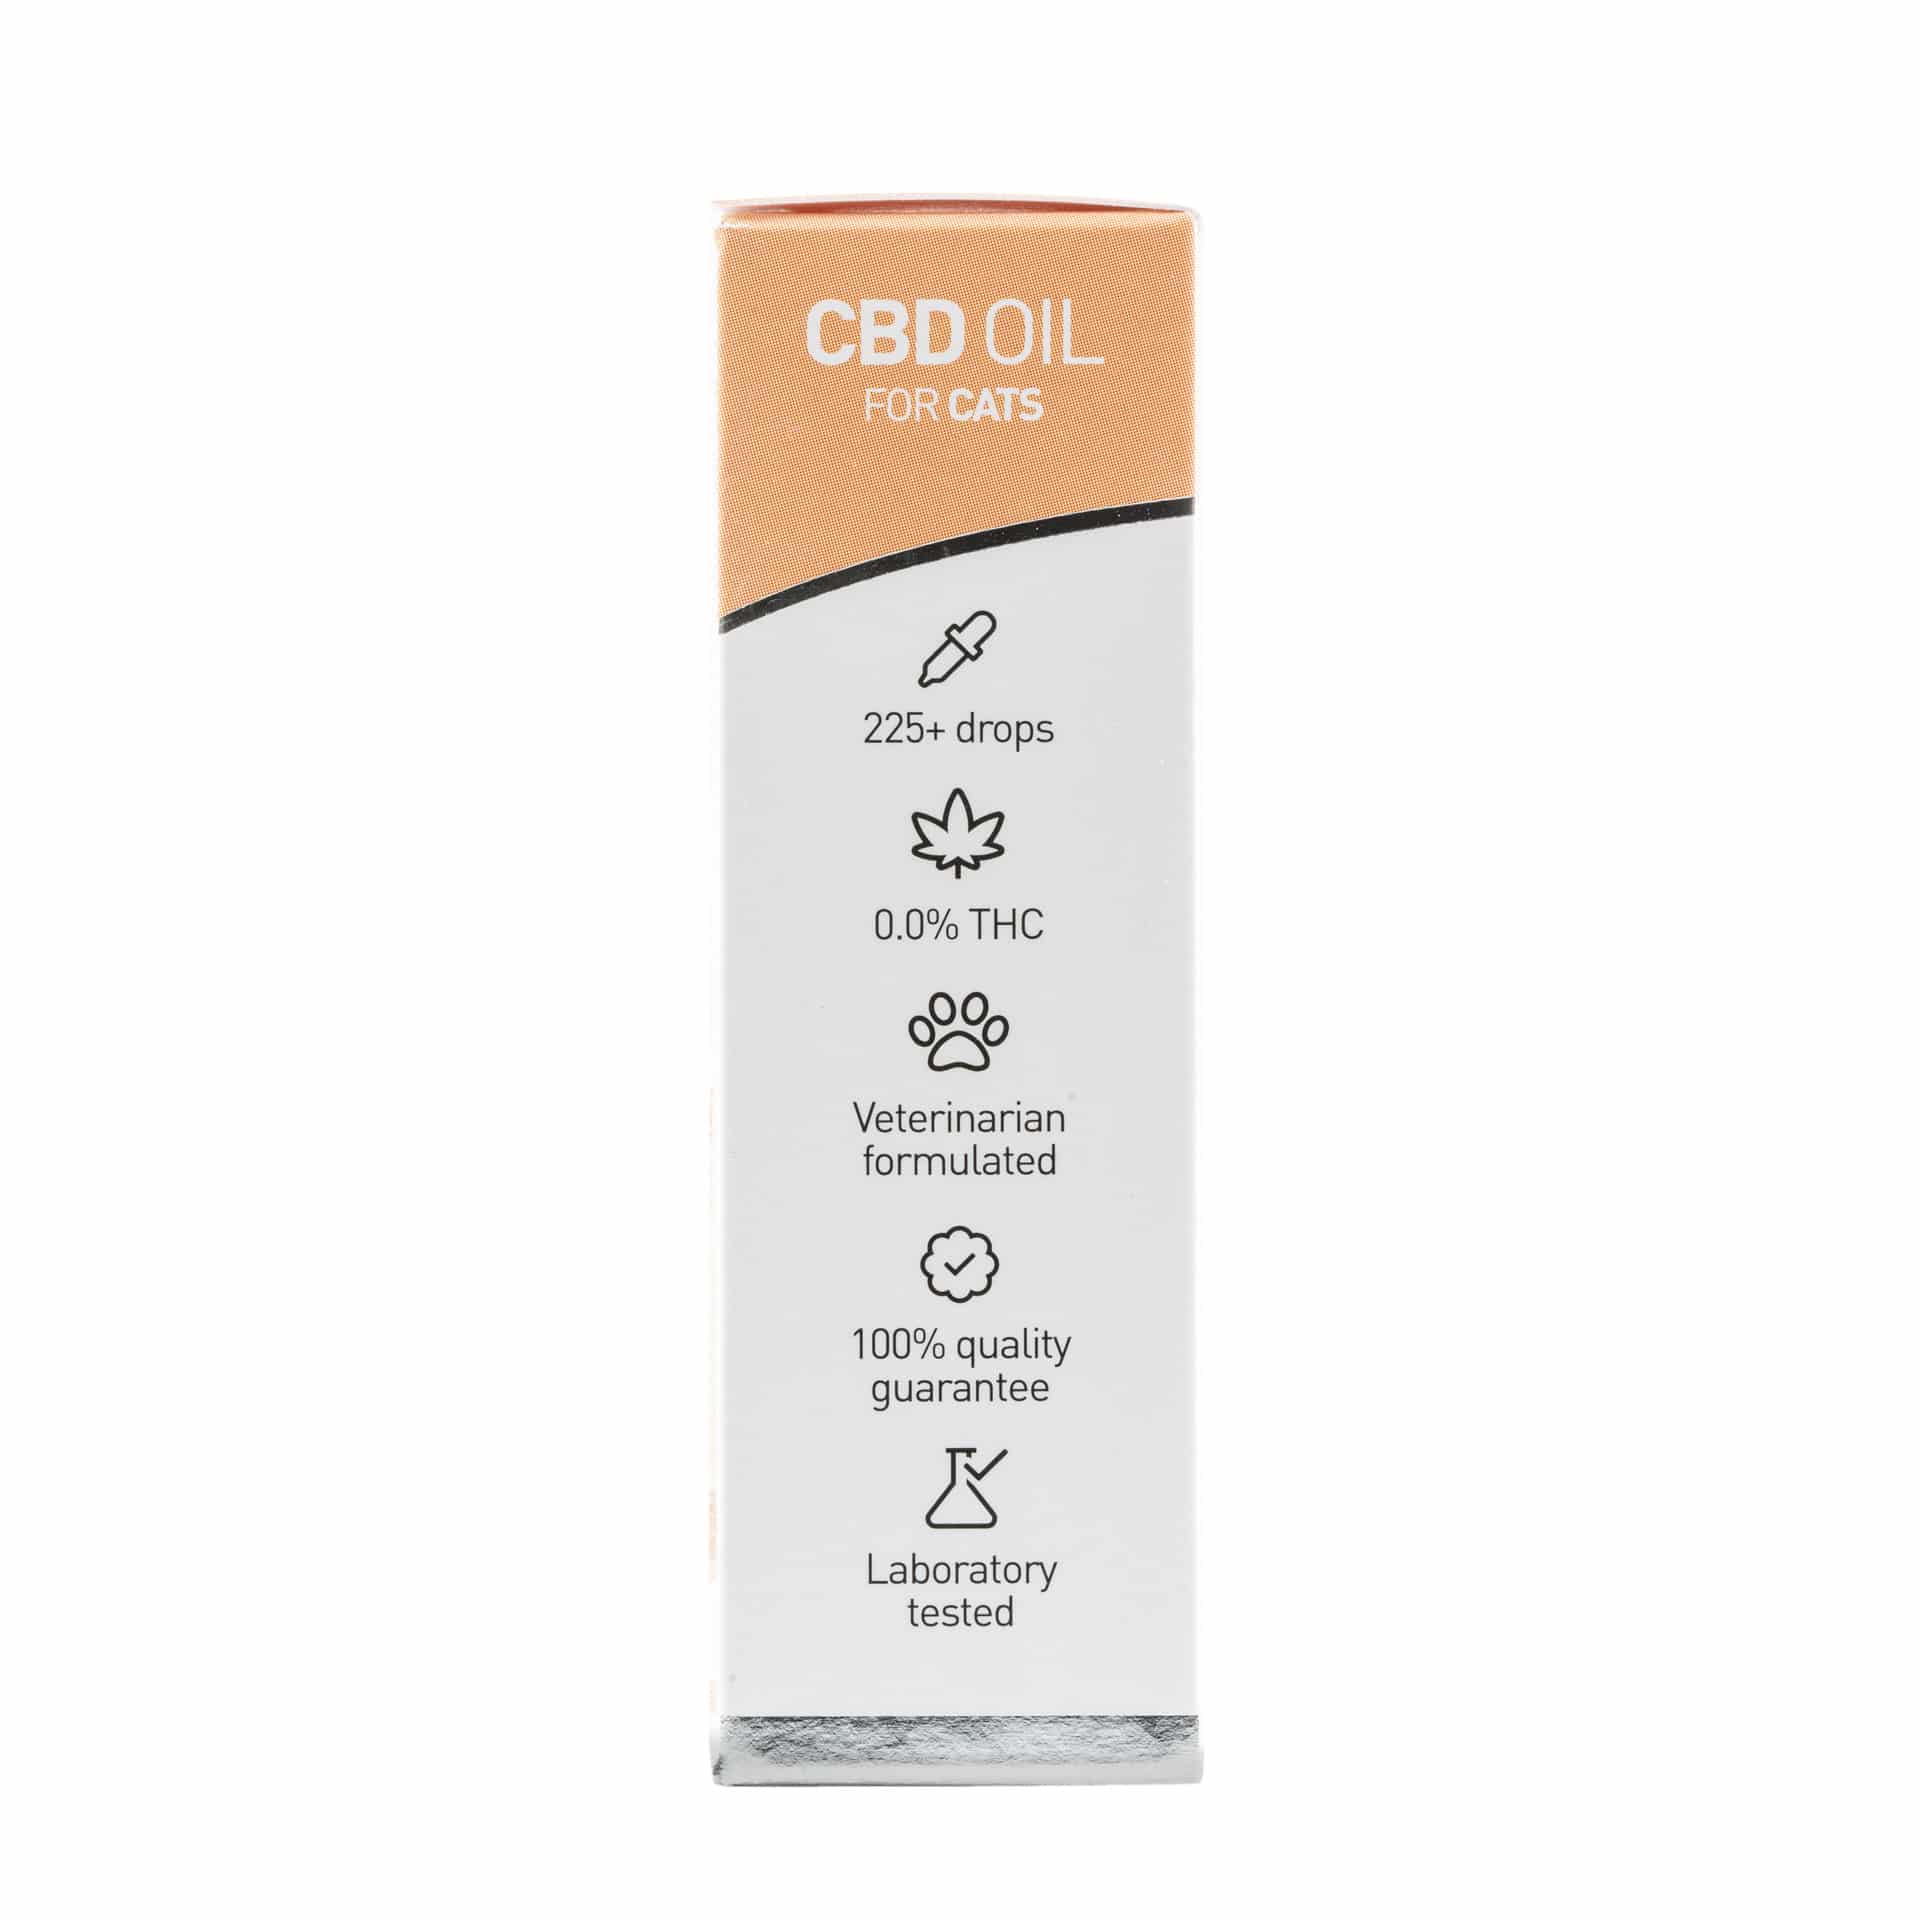 A tube of Renova CBD oil 2,5% for cats (10ml) on a white background.